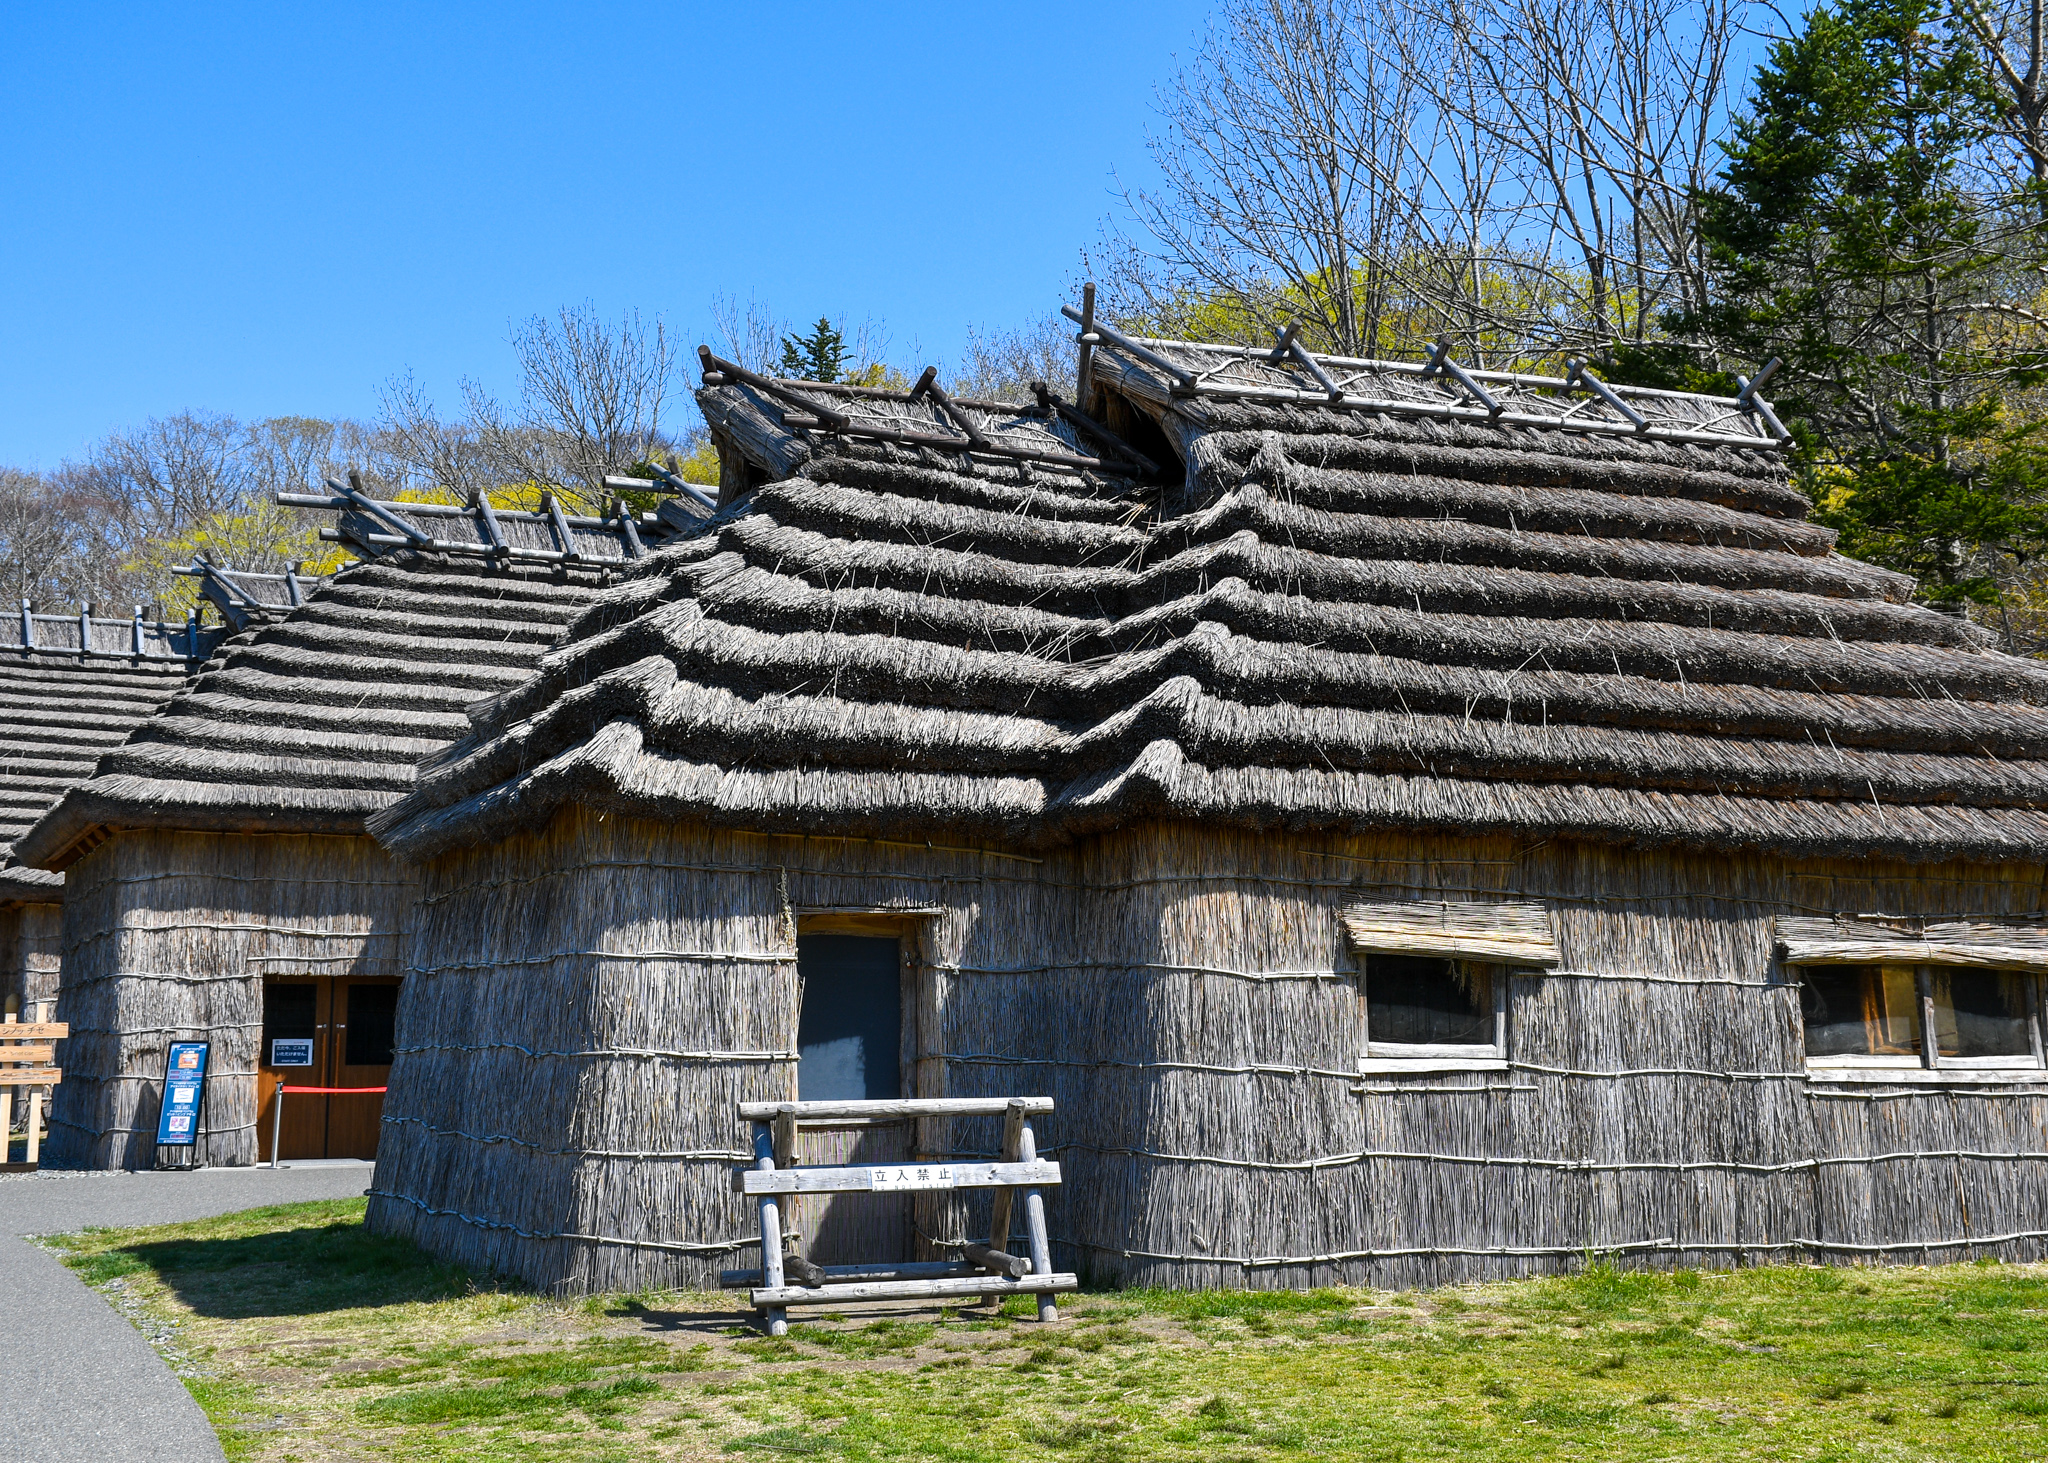 The Kotan area features a number of traditional Ainu housing called 